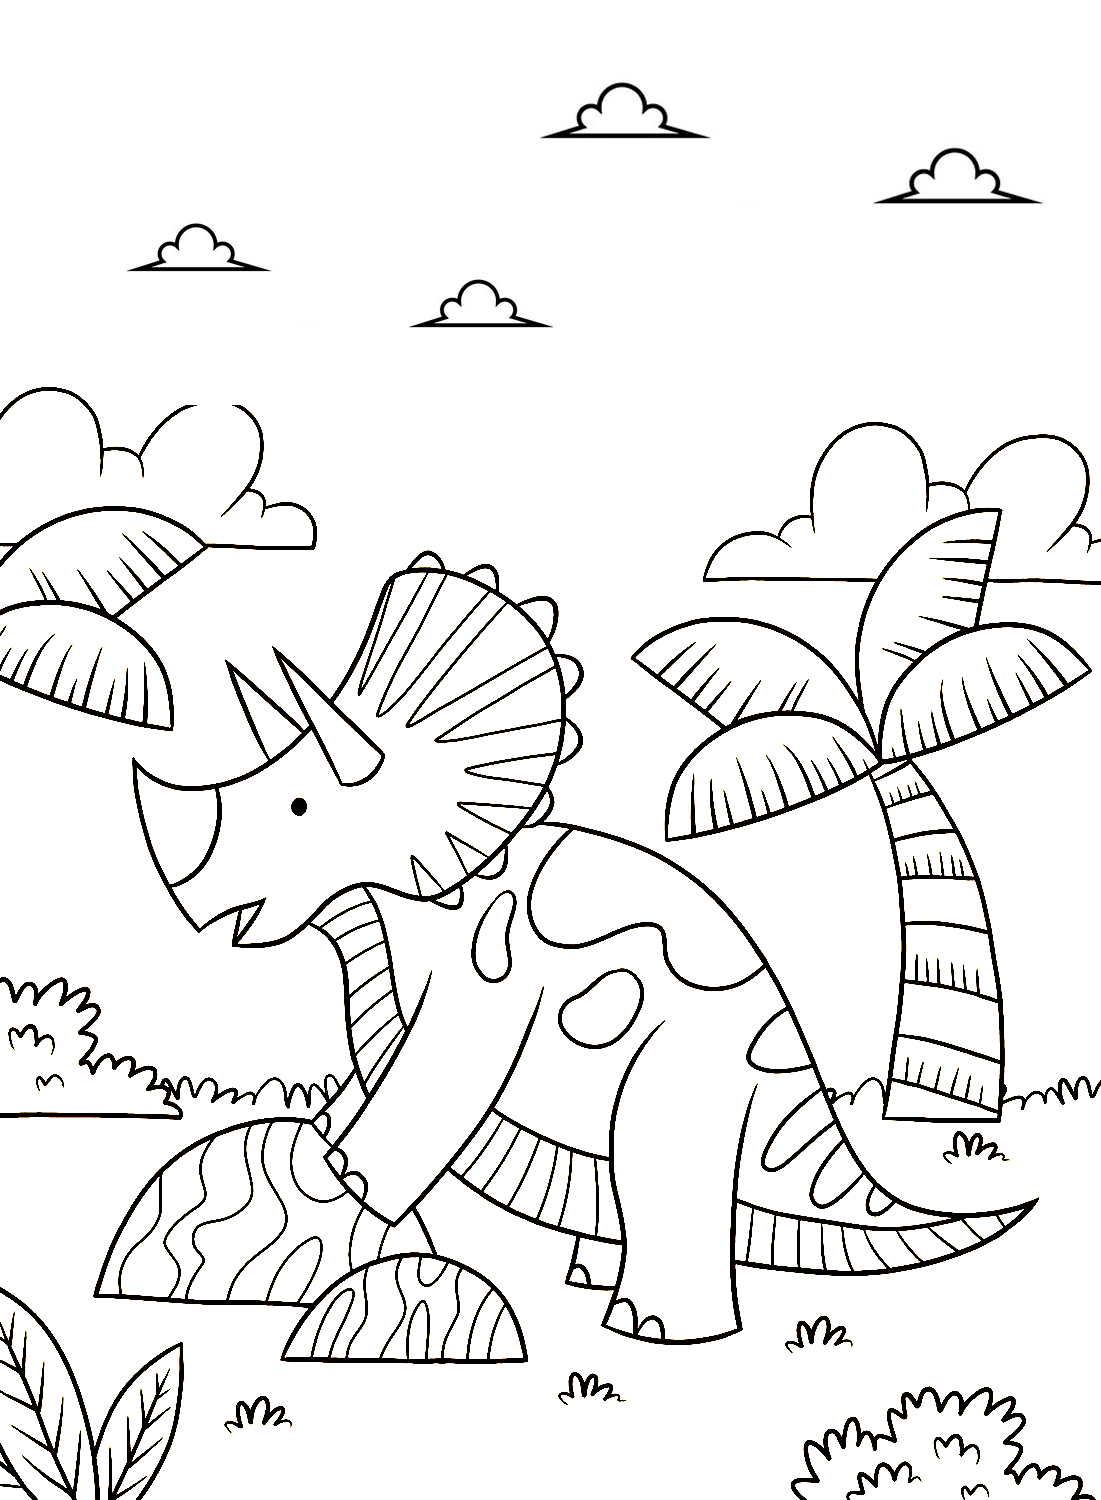 Triceratops printable coloring pages from Triceratops